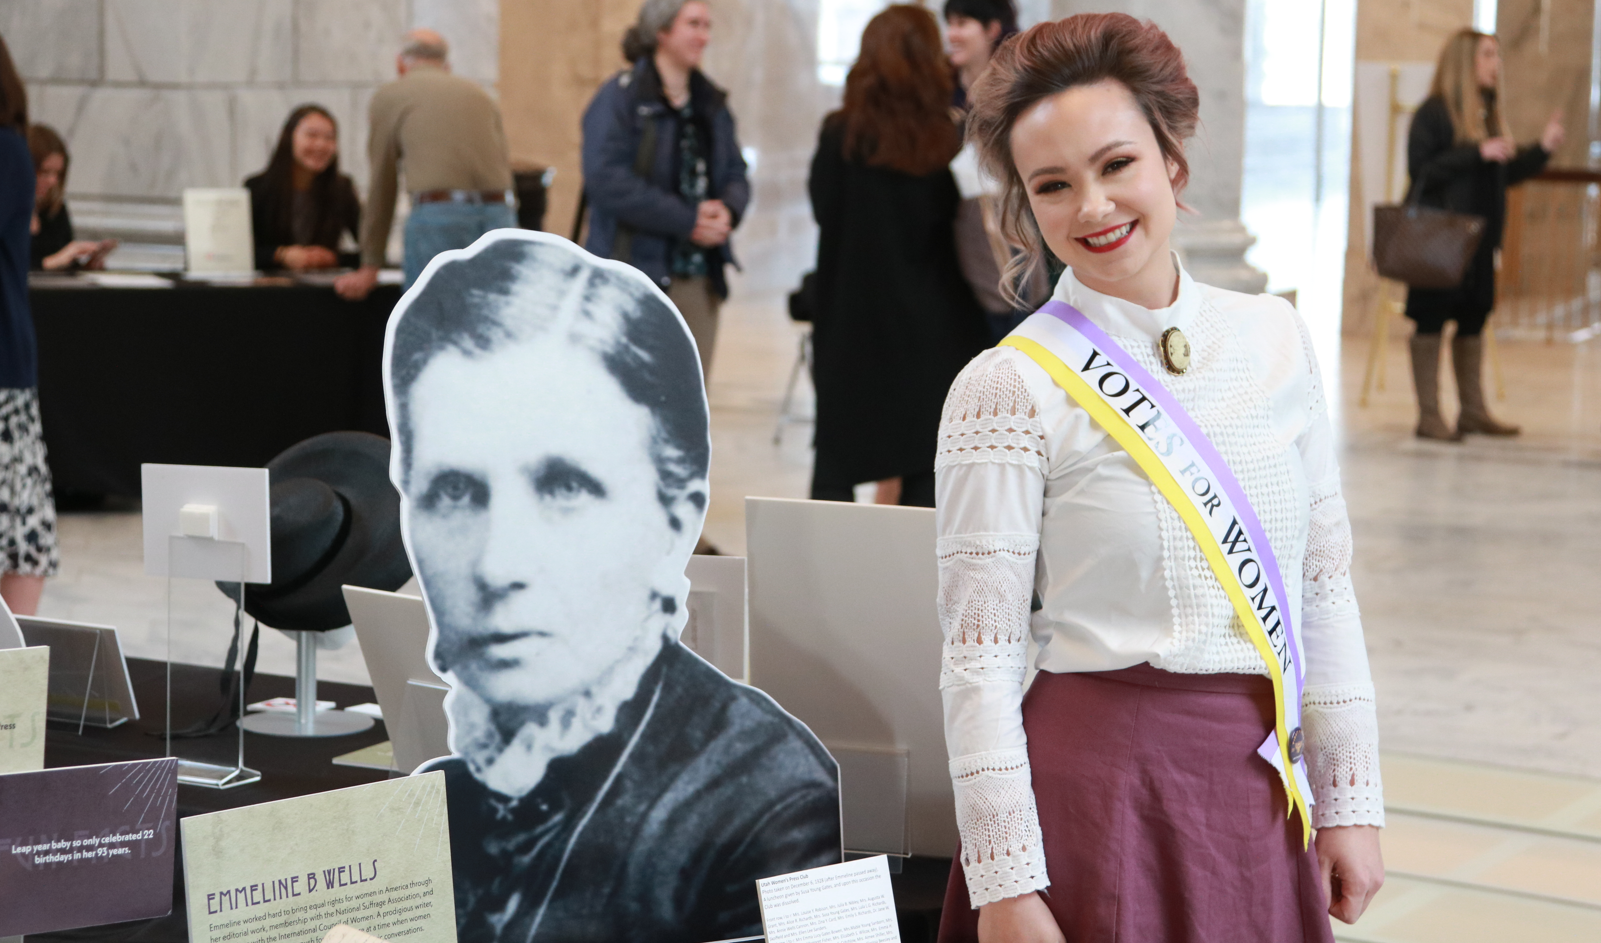 Modern woman with a "Votes for Women" sash